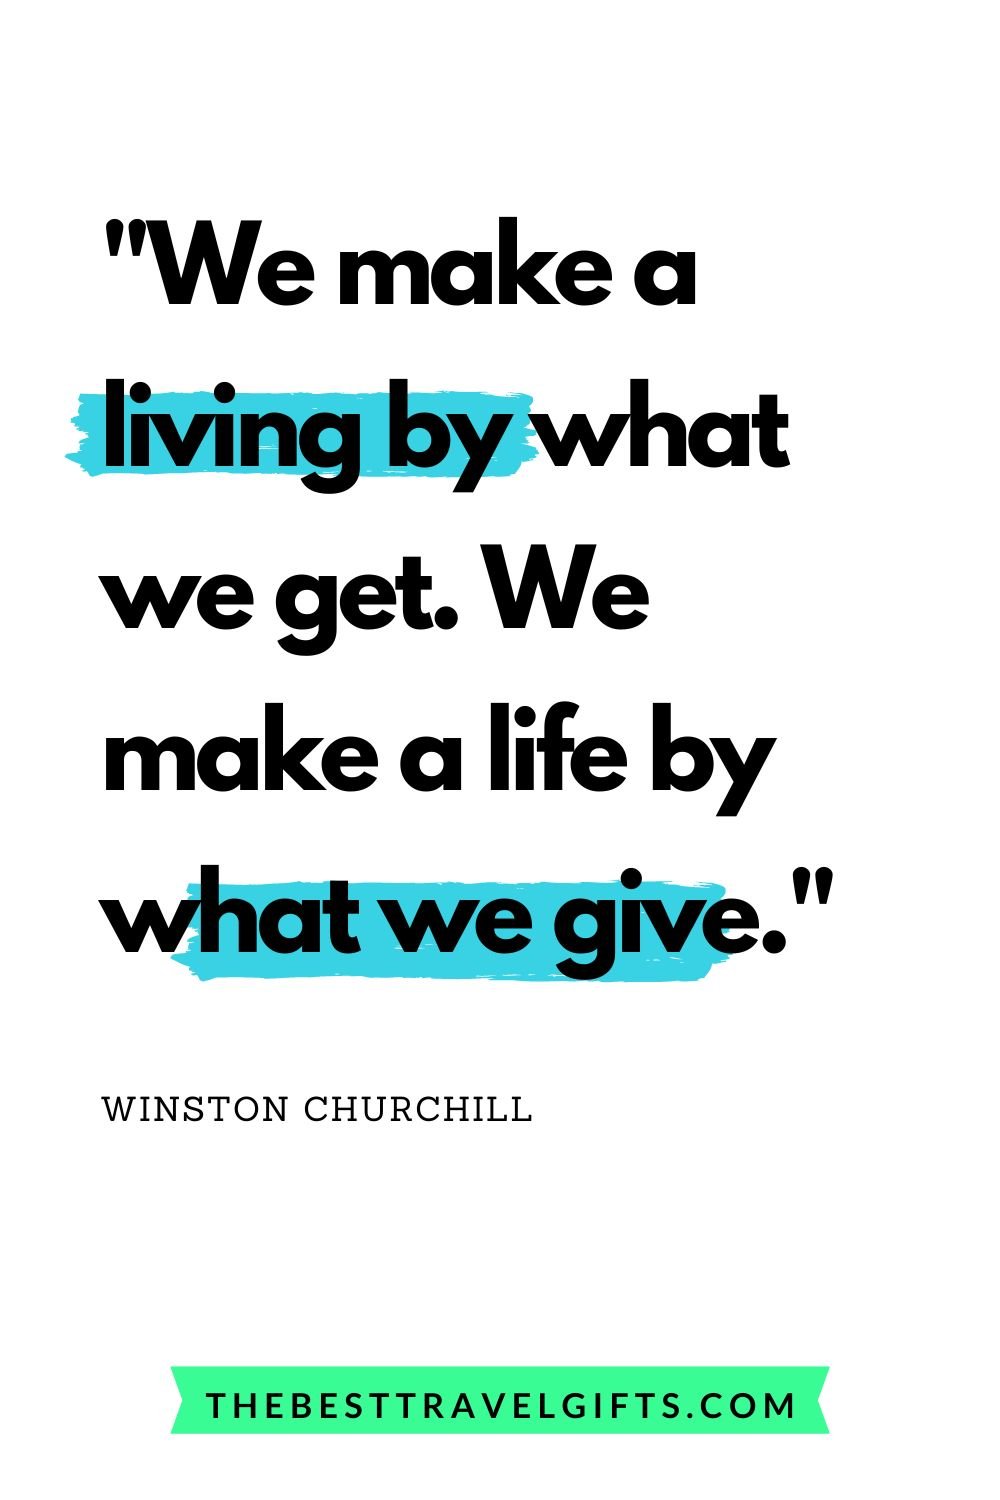 quote: we make a living by what we get. We make a life by what we give